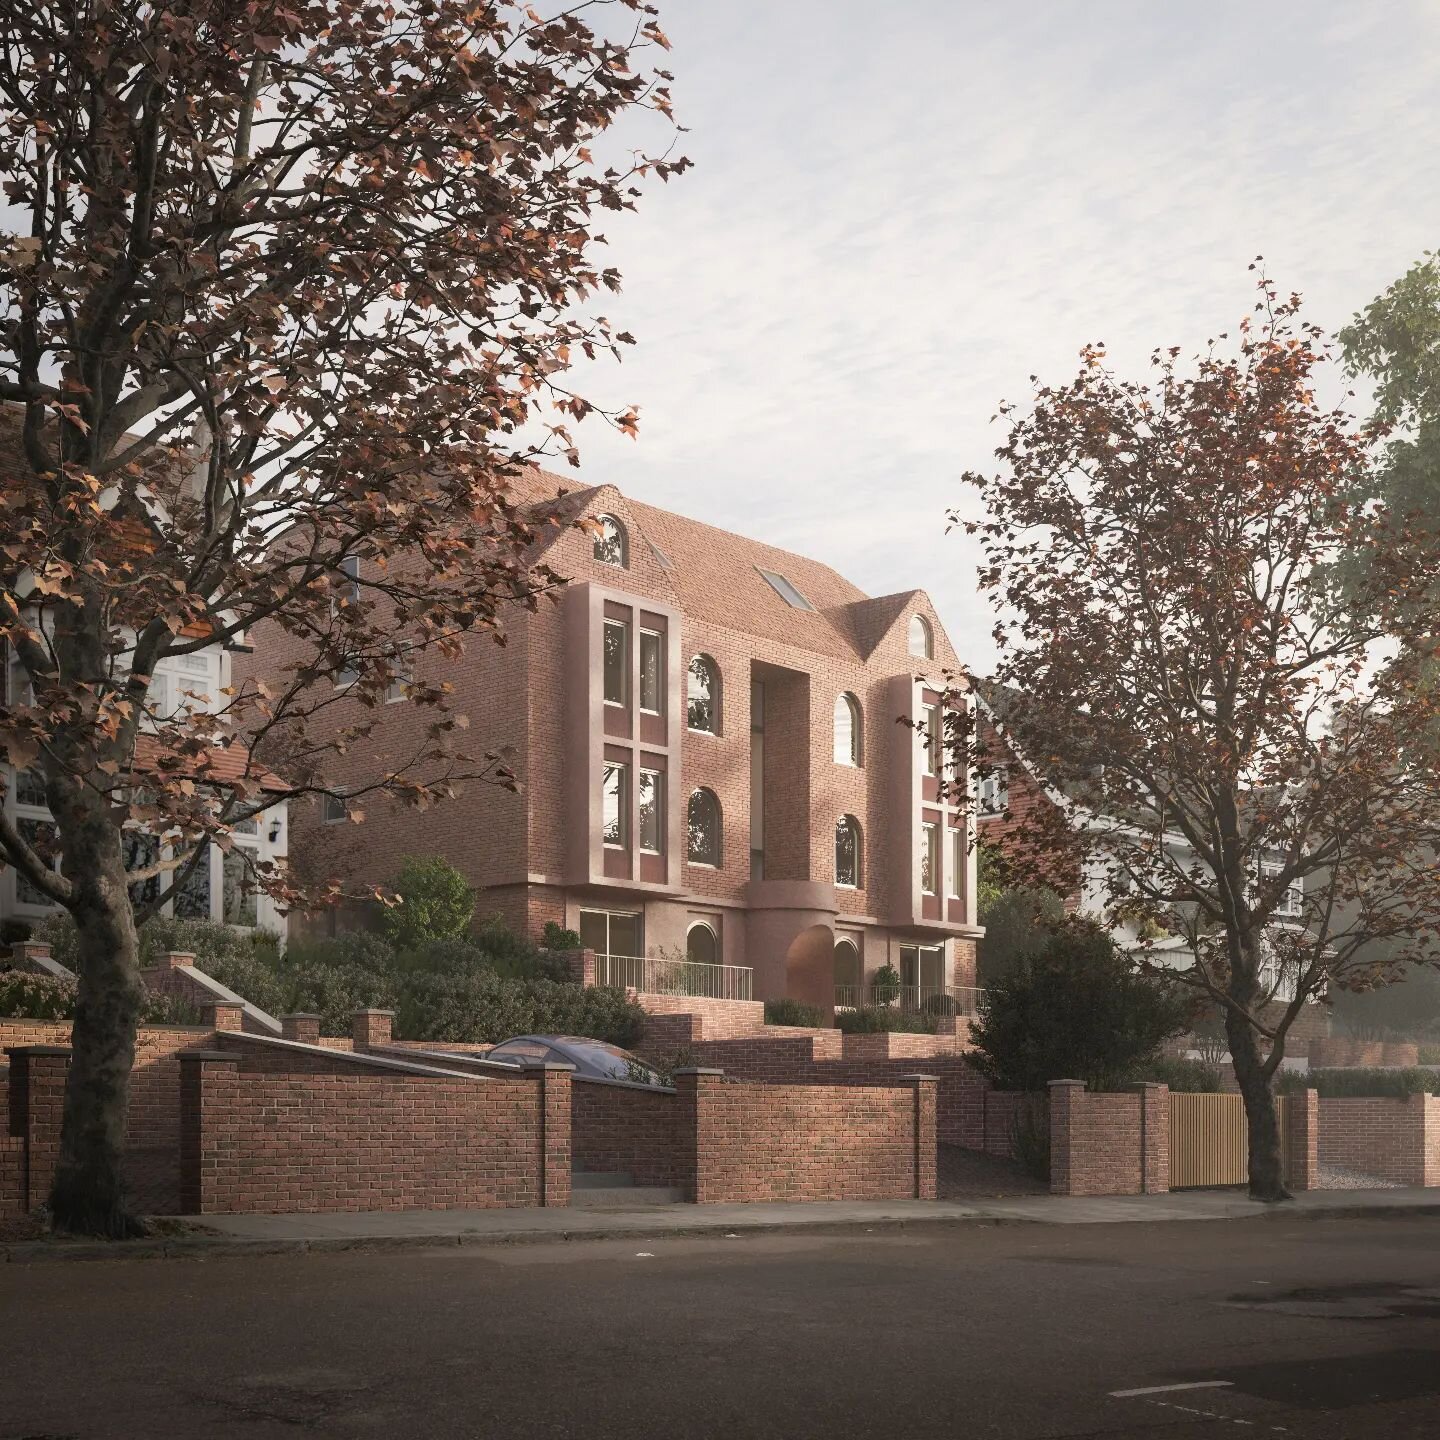 We are excited to add this development to the Croydon community with our new 9 flats proposal! Check it out from the street view! 

📷 By @oflightstudio 

#traditionalbaywindows #traditionalbaywindow #newbuildflats #newbuildflatslondon #croydon #croy